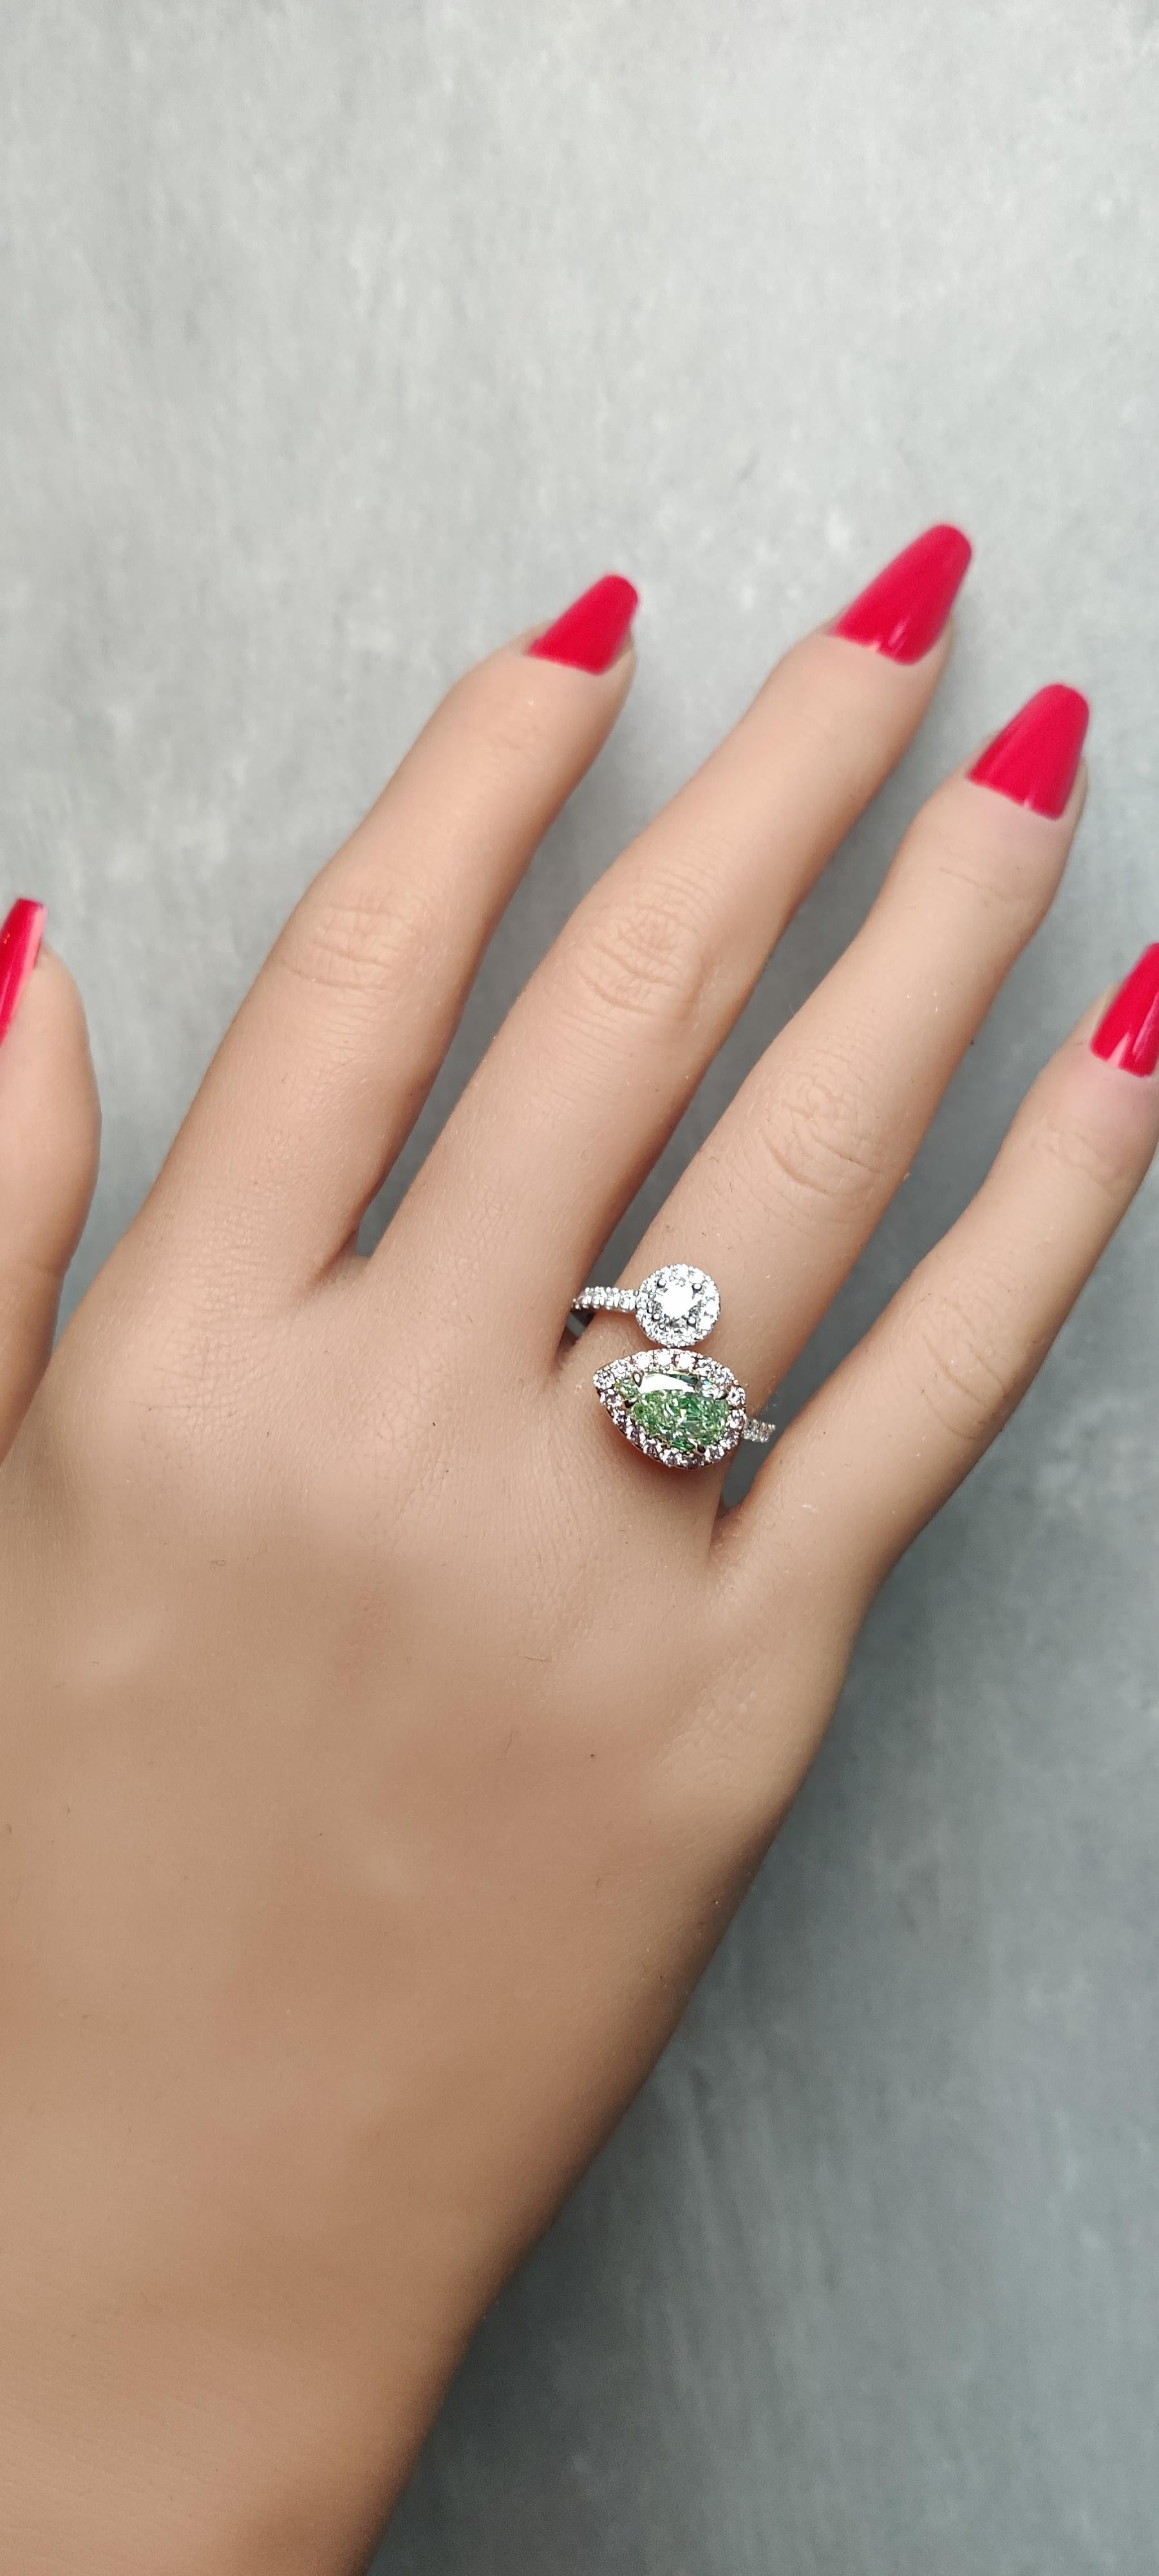 RareGemWorld's classic GIA certified diamond ring. Mounted in a beautiful 18K Rose and White Gold setting with a natural pear cut green diamond. The green diamond is surrounded by round natural white diamond melee and round natural pink diamond